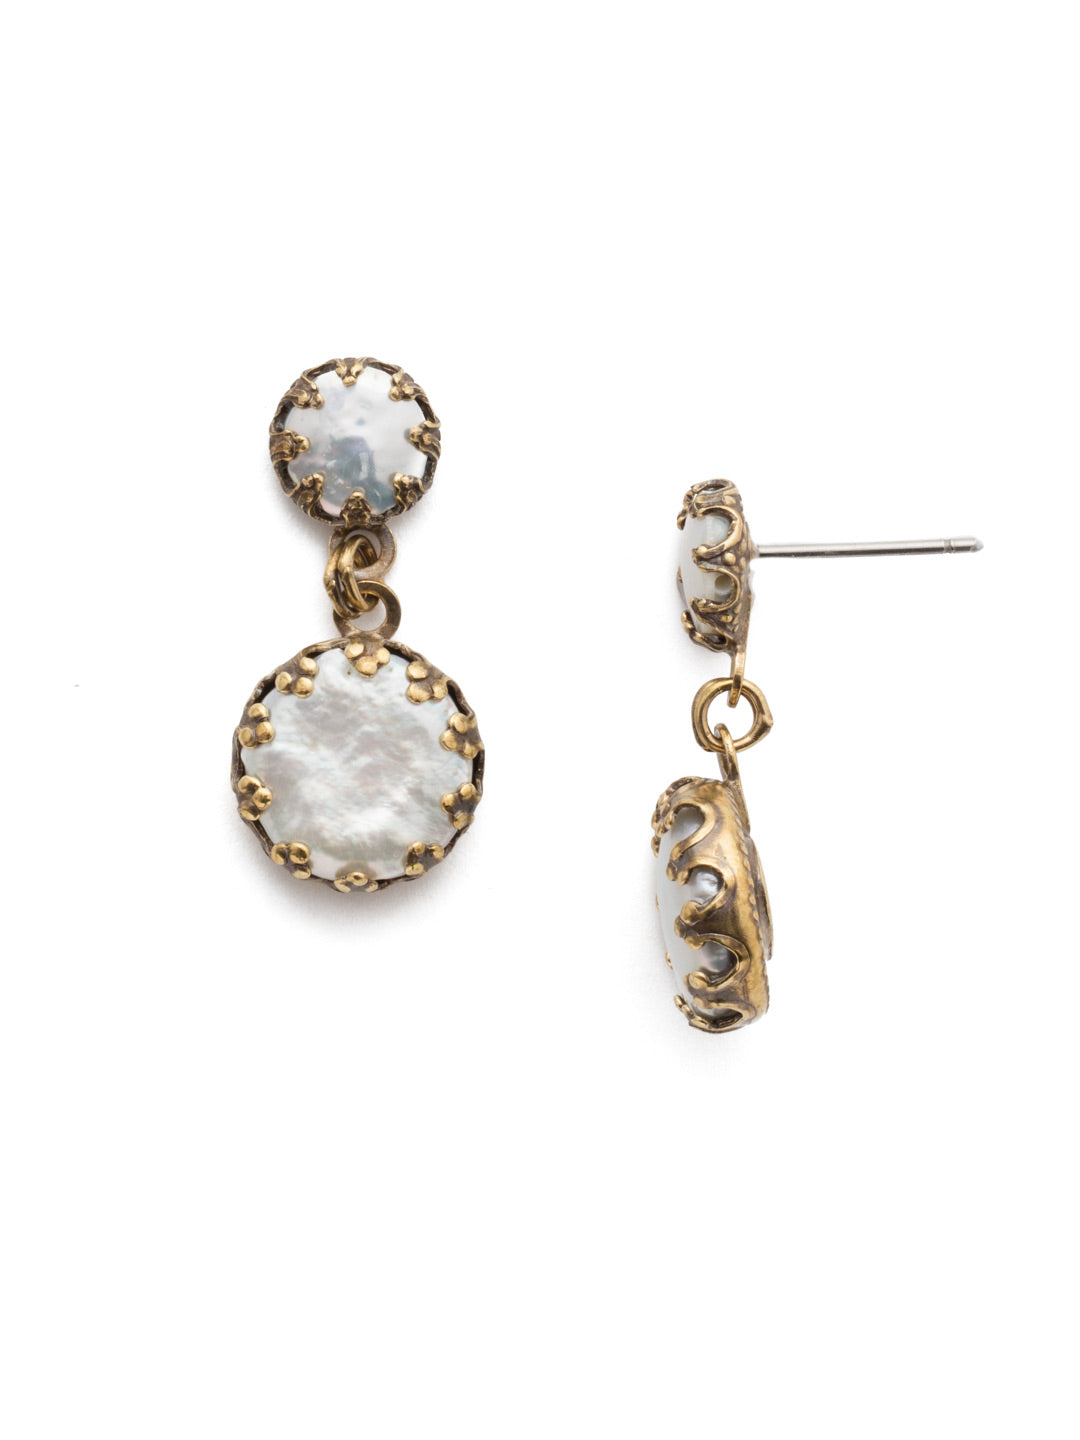 Oaklyn Dangle Earrings - EEP1AGSDE - <p>The Oaklyn Dangle Earrings are wardrobe essentials. Classic pearls and delicate and intricate metal details combine in a pair that will be passed down for generations. From Sorrelli's Selvedge Denim collection in our Antique Gold-tone finish.</p>